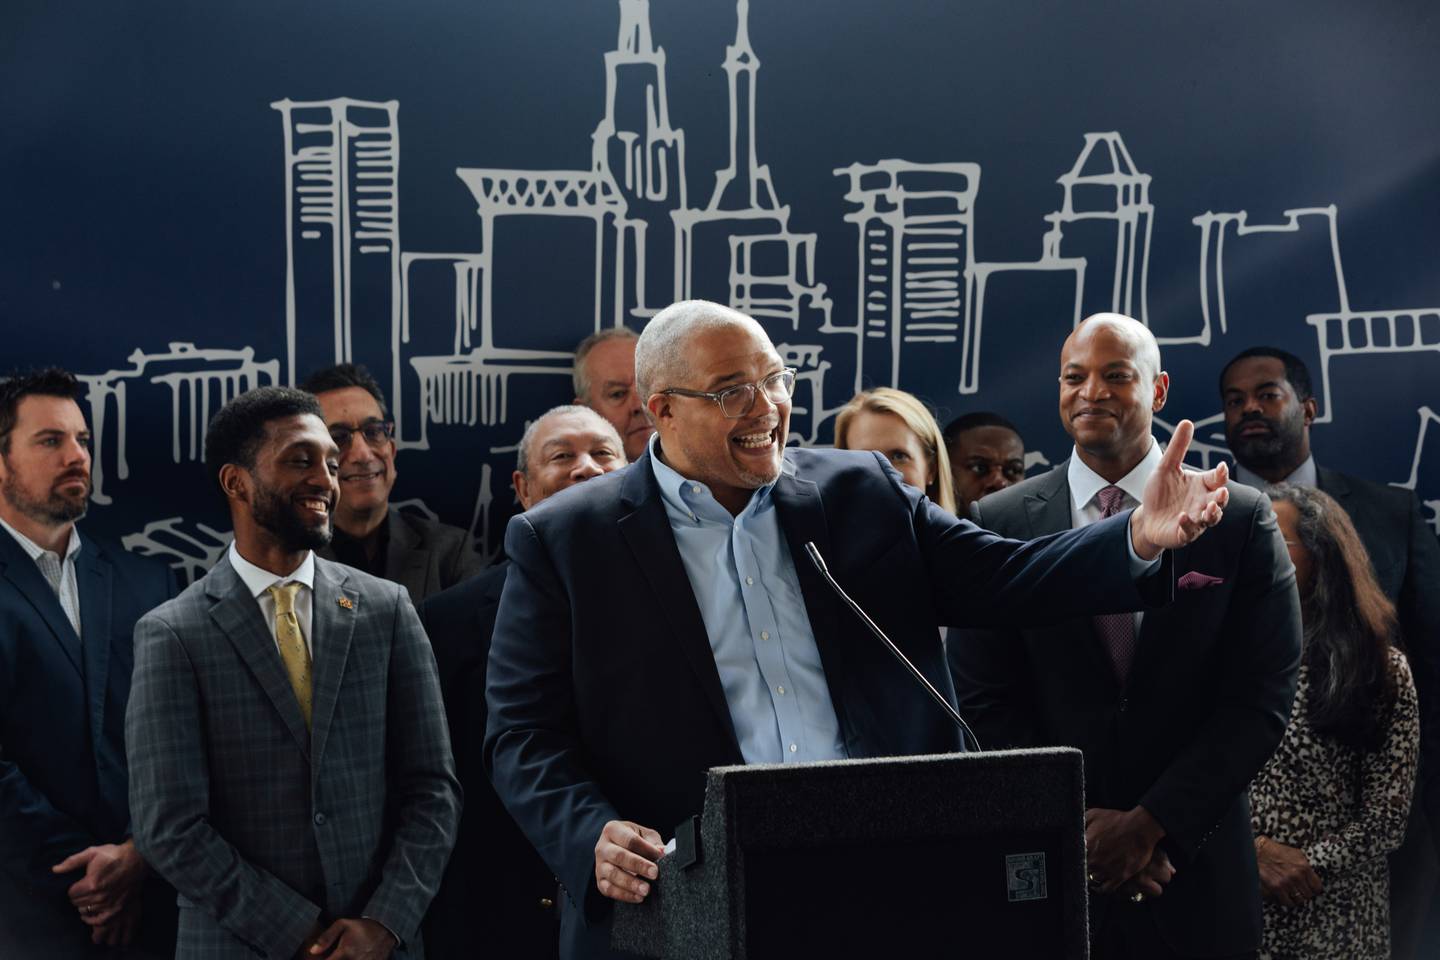 MCB Real Estate Co-Founder David Bramble speaks at a press conference where the company’s plans for the Harborplace development are revealed, at the Light Street pavilion on Monday, Oct. 30, 2023 in Baltimore, MD.